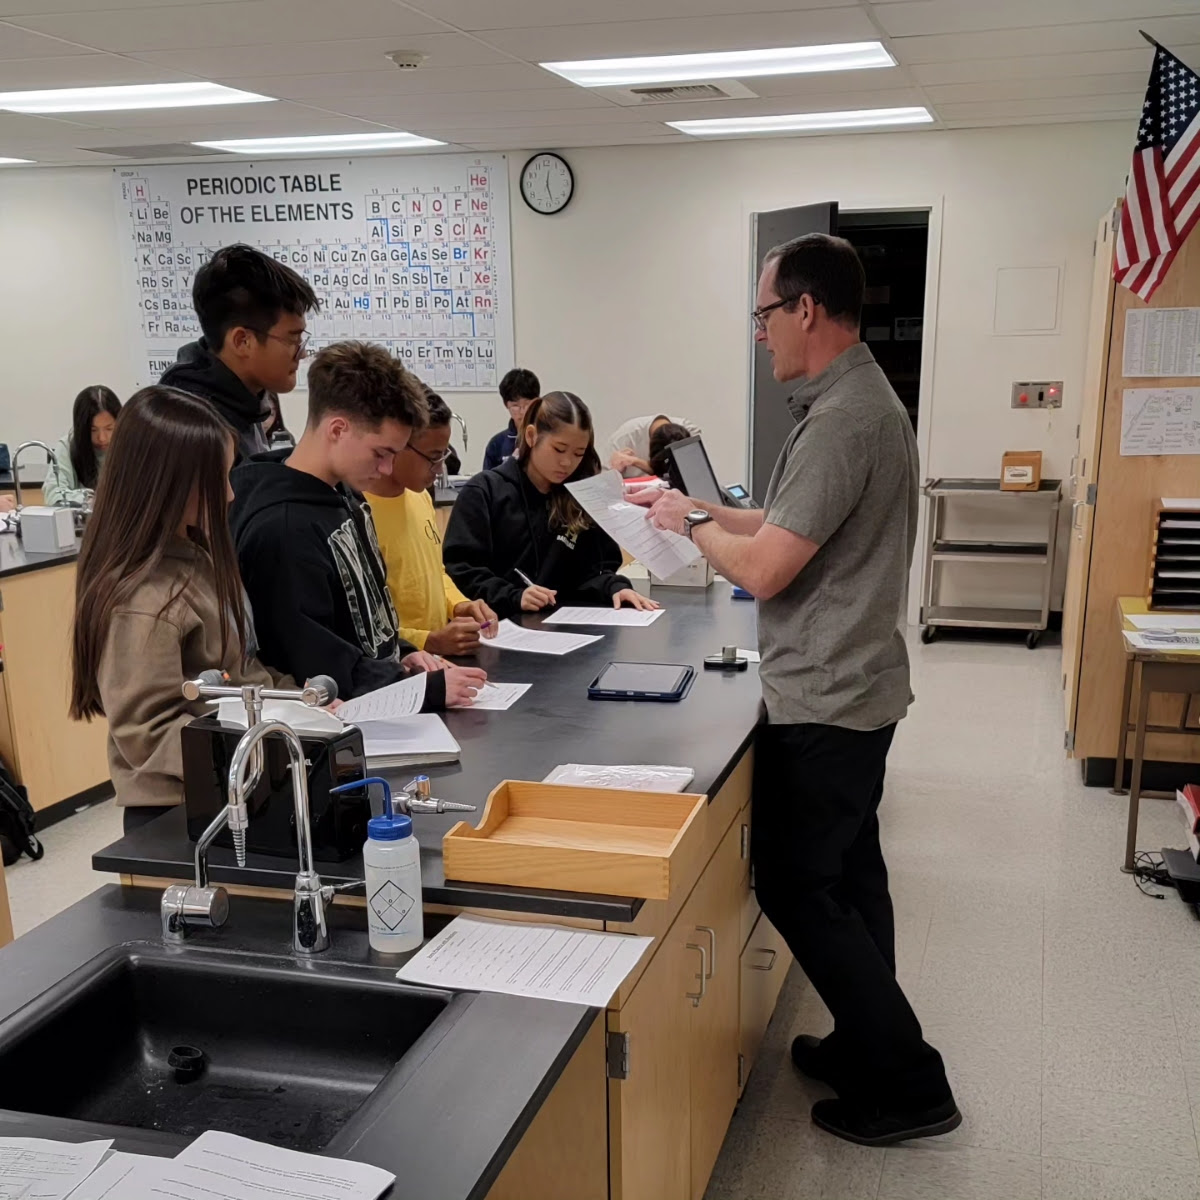 Science teacher Andrew Colomac (right) helps his fourth period Honors Chemistry students check their answers from the printed worksheets they completed, which was the adjustment Colomac made as students were unable to access them on Google Classroom because of the second day of the network outage on Wednesday, Nov. 15. (Image used with permission from Craig Weinreich)